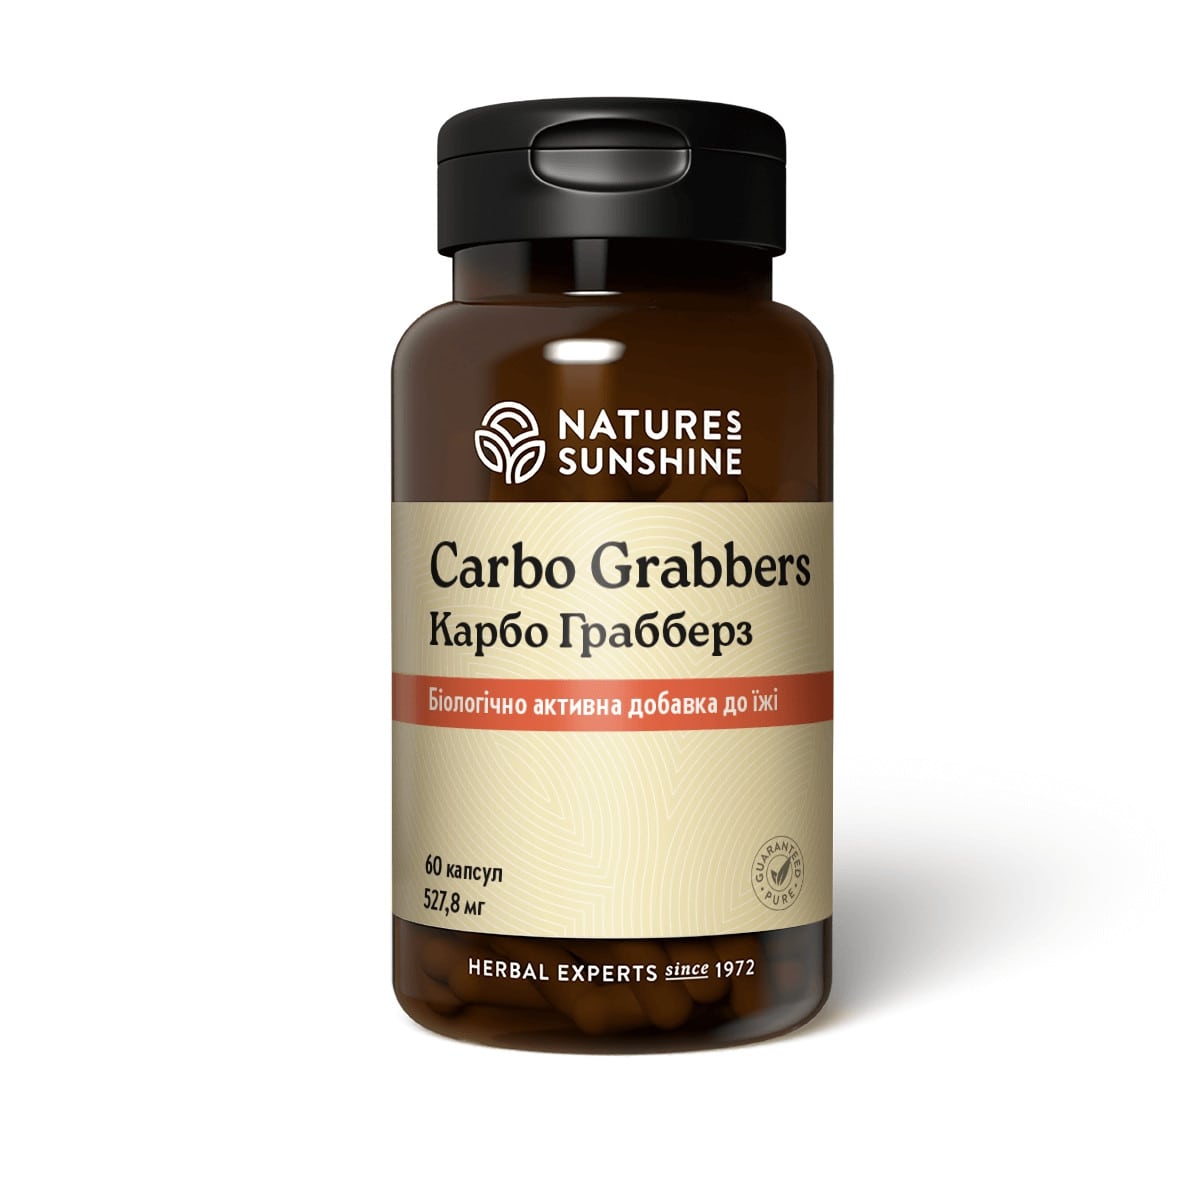 Carbo Grabbers - Карбо Грабберз - БАД Nature's Sunshine Products (NSP)